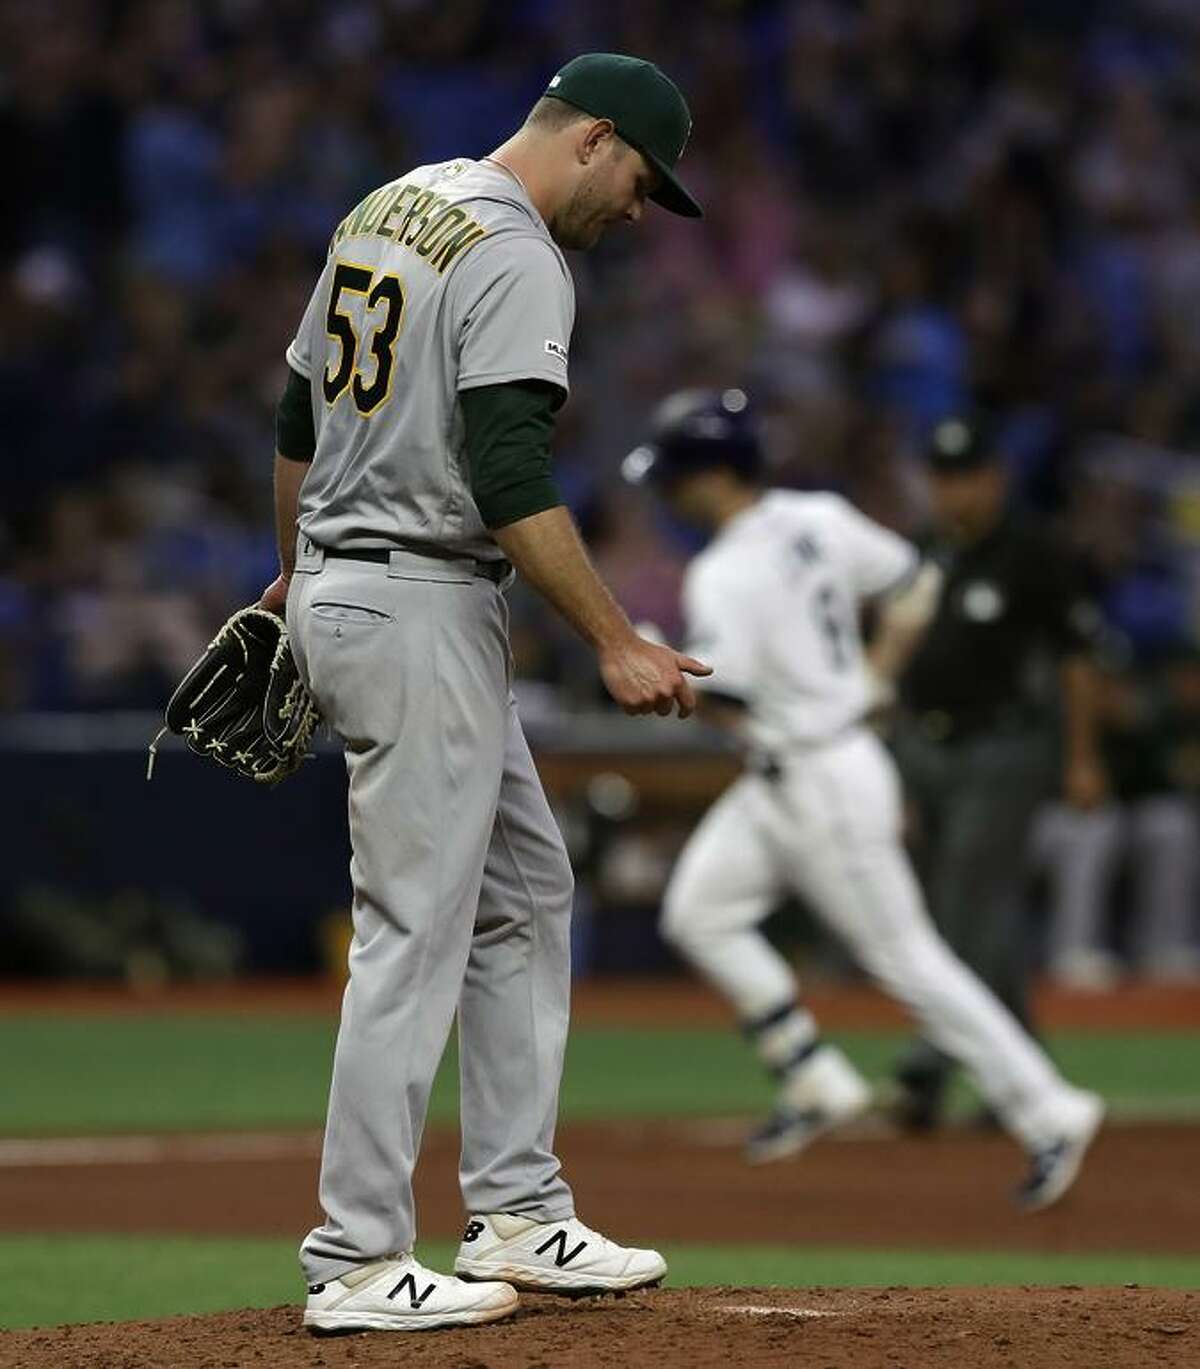 A’s pitcher Tanner Anderson allowed a two-run home run to the Rays’ Brandon Lowe (in background) in the sixth inning. Anderson was making his A’s debut after spending the first few weeks of the season at AAA Las Vegas.